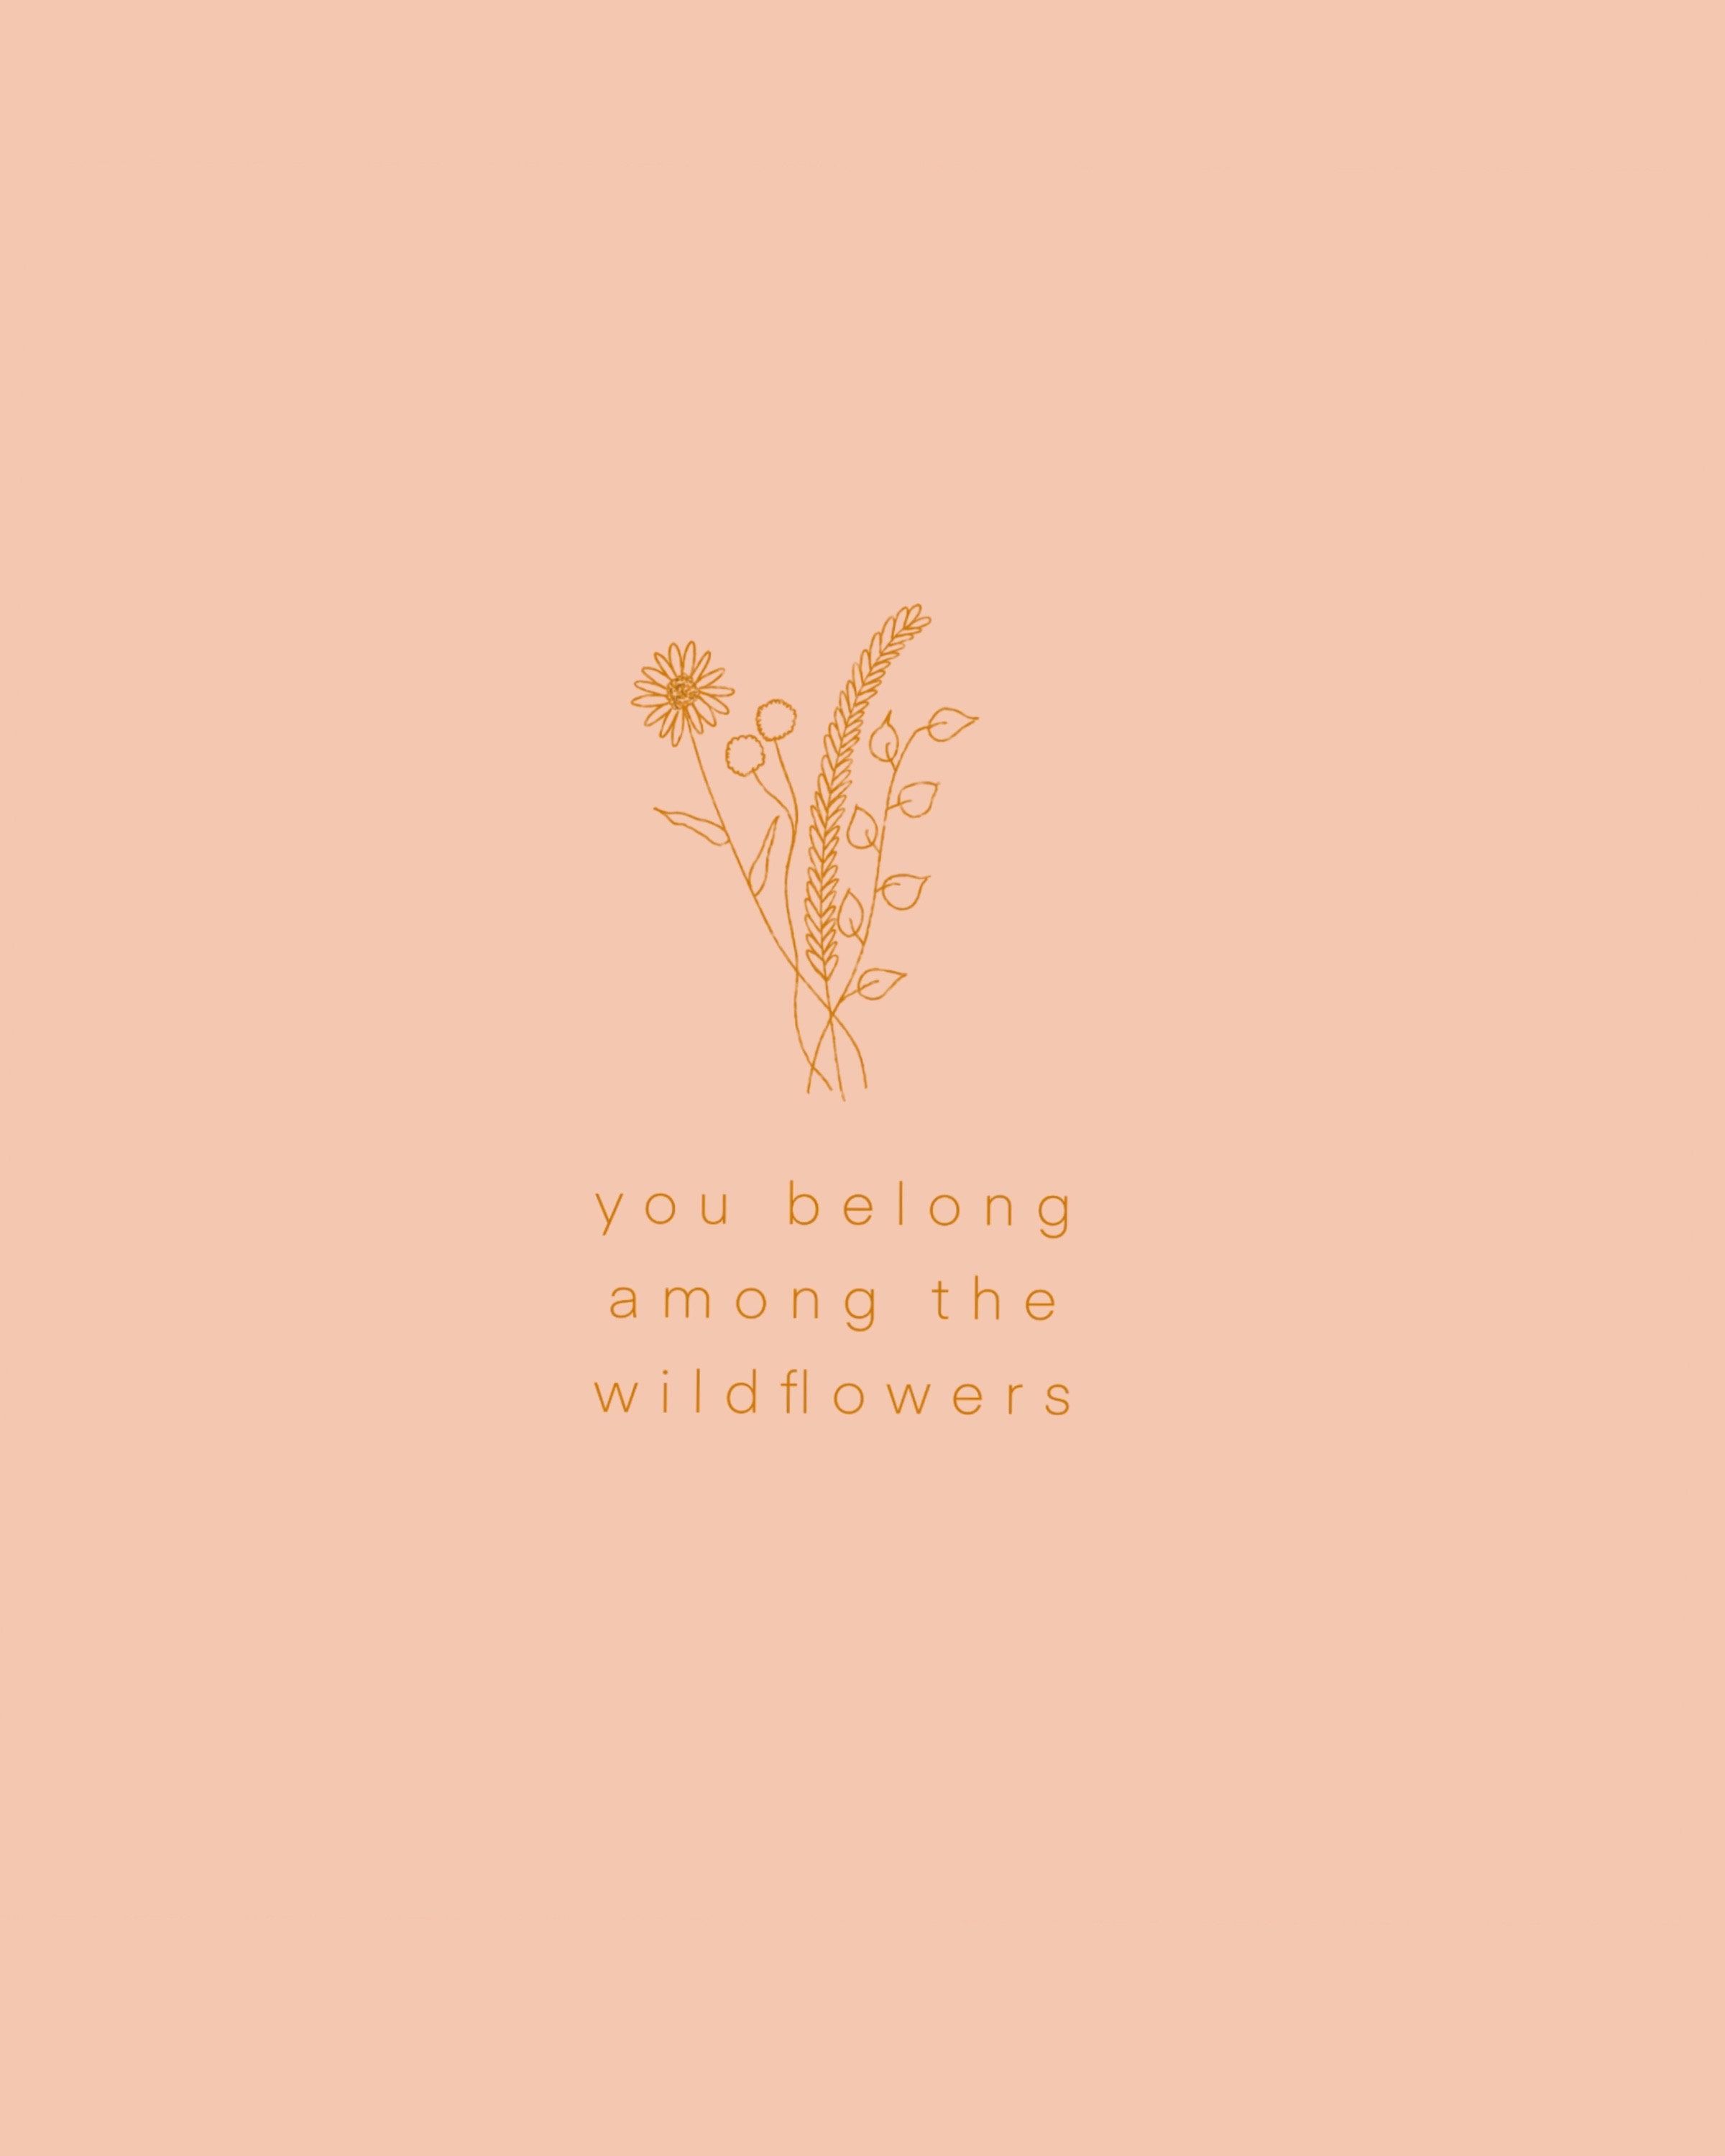 Inspiring Quote Print/ Instant Download/ Wall Art/ Home Decor/ Digital Drawing/ You Belong Among The Wildflowers Printable/ Boho wall print - Inspiring Quote Print/ Instant Download/ Wall Art/ Home Decor/ Digital Drawing/ You Belong Among The Wildflowers Printable/ Boho wall print -   16 beauty Quotes flowers ideas